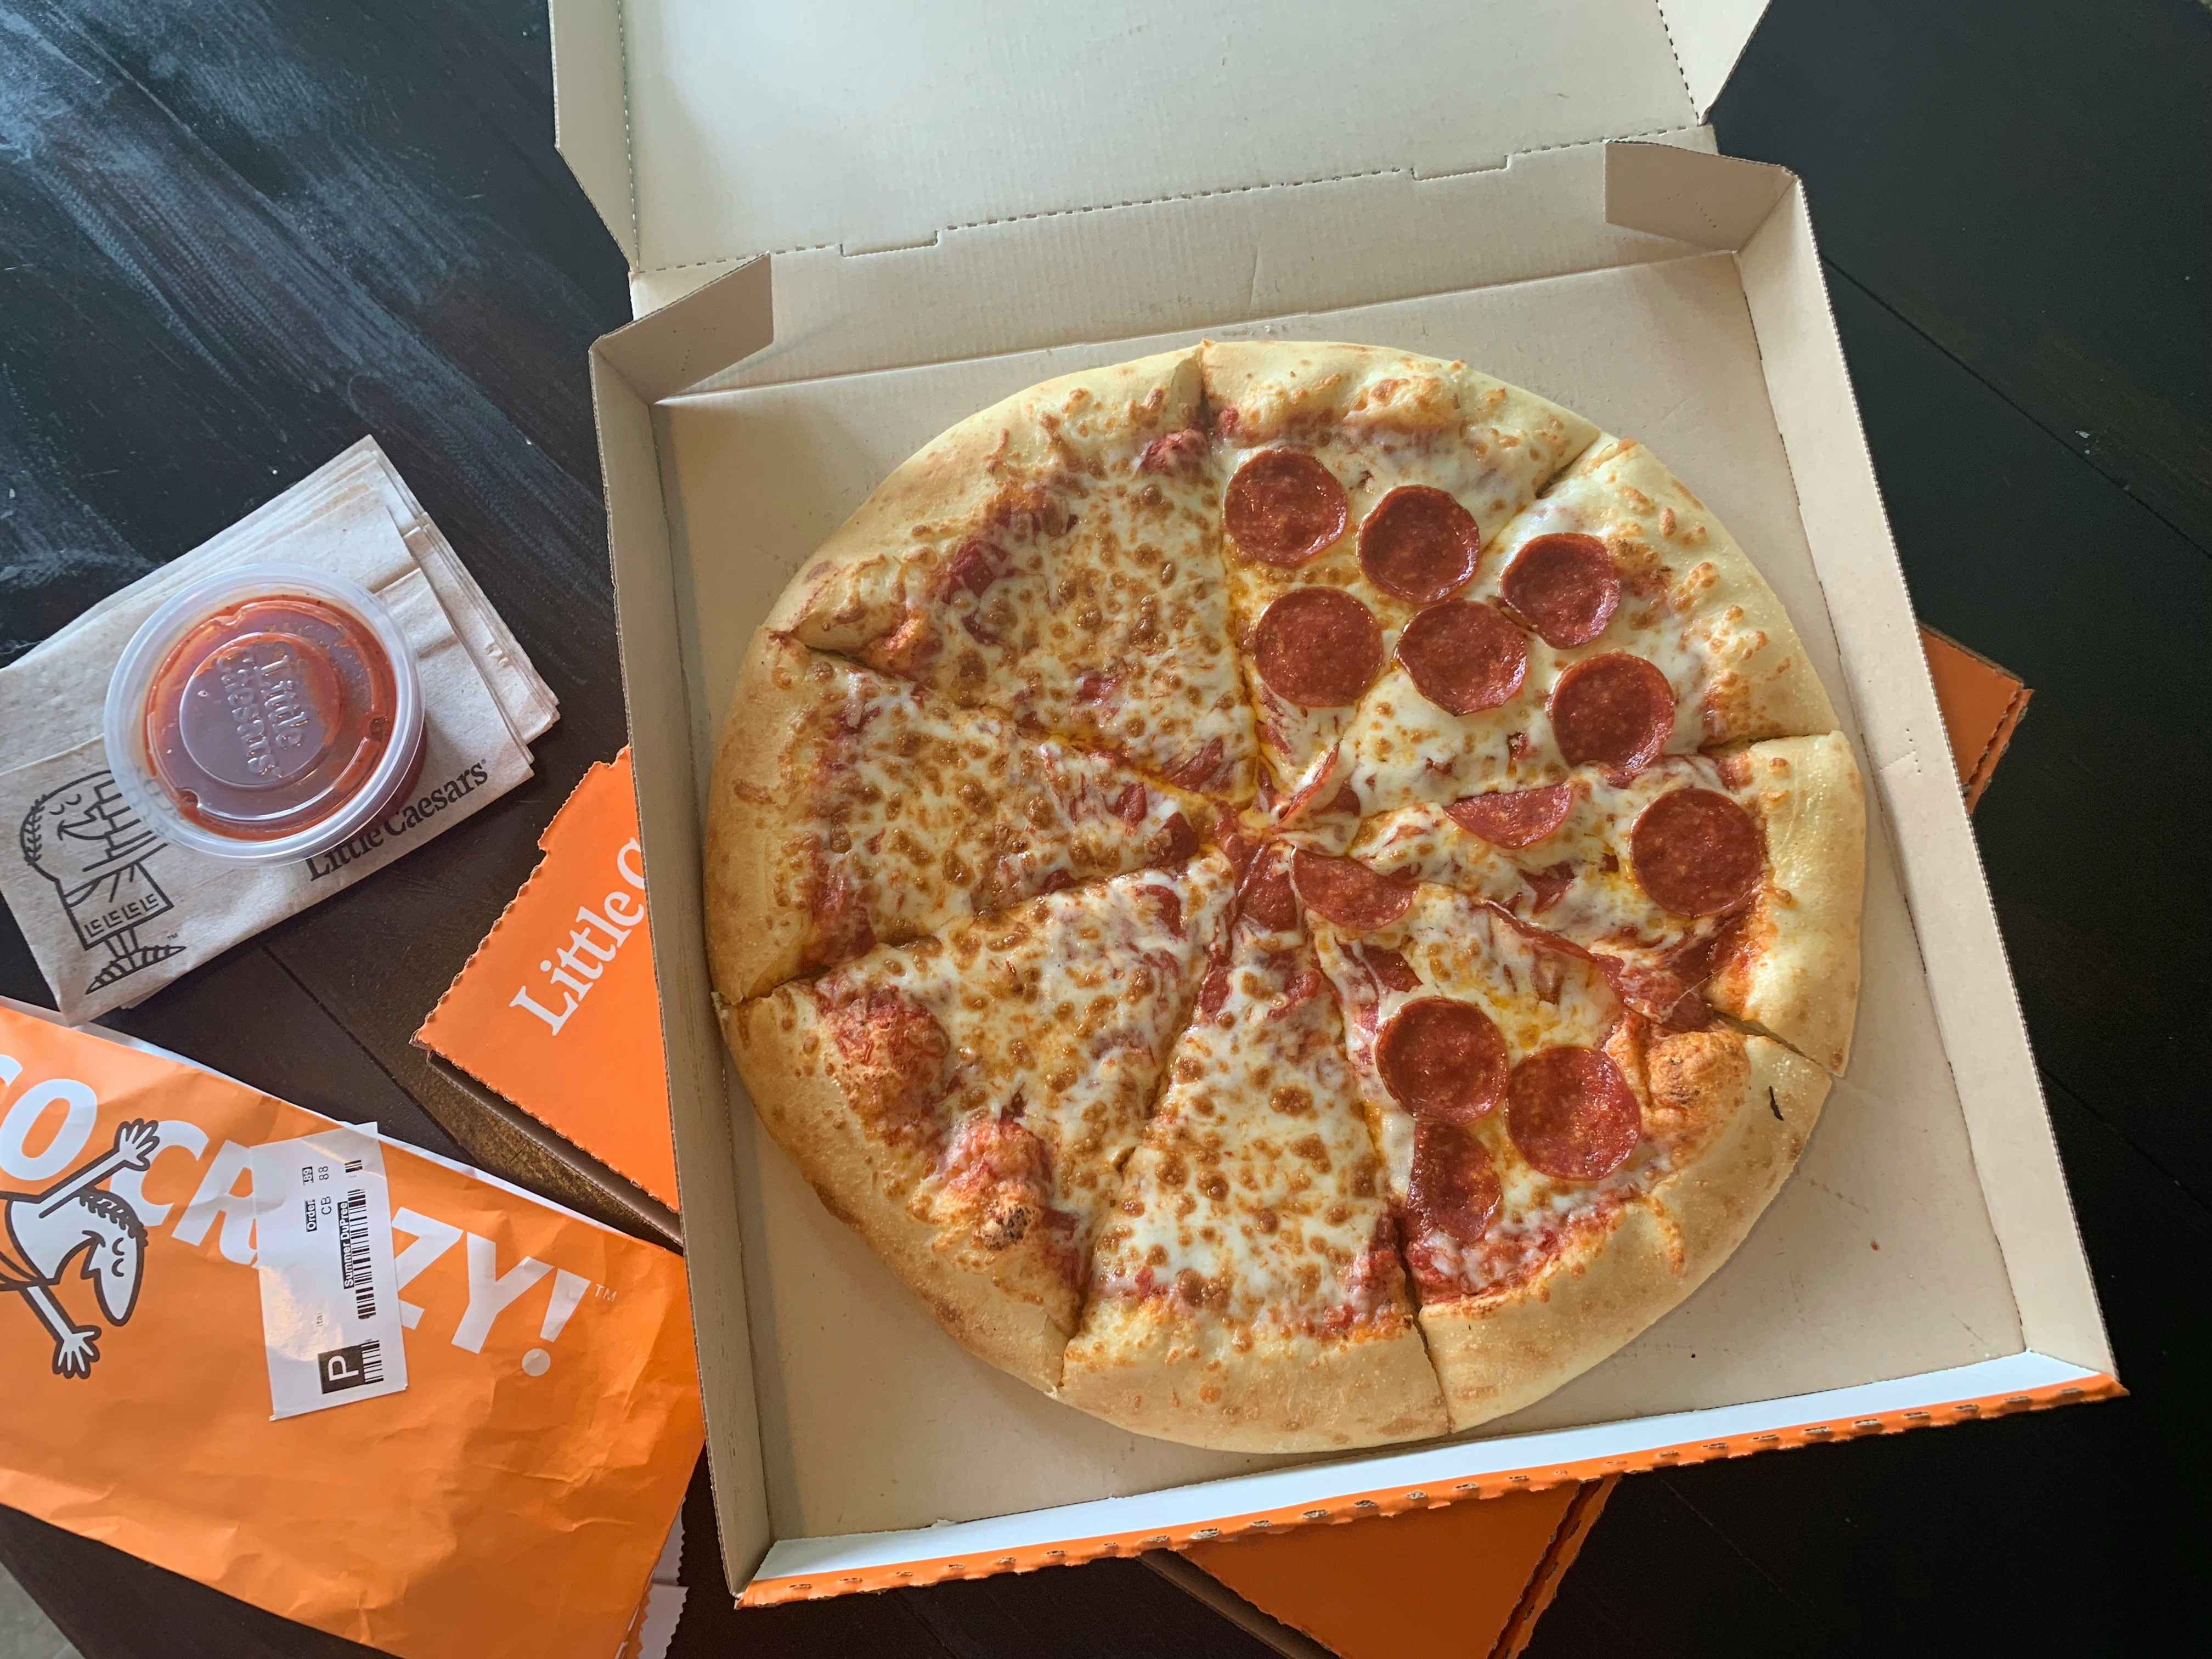 Hhalf cheese half pepperoni pizza from Little Caesar's